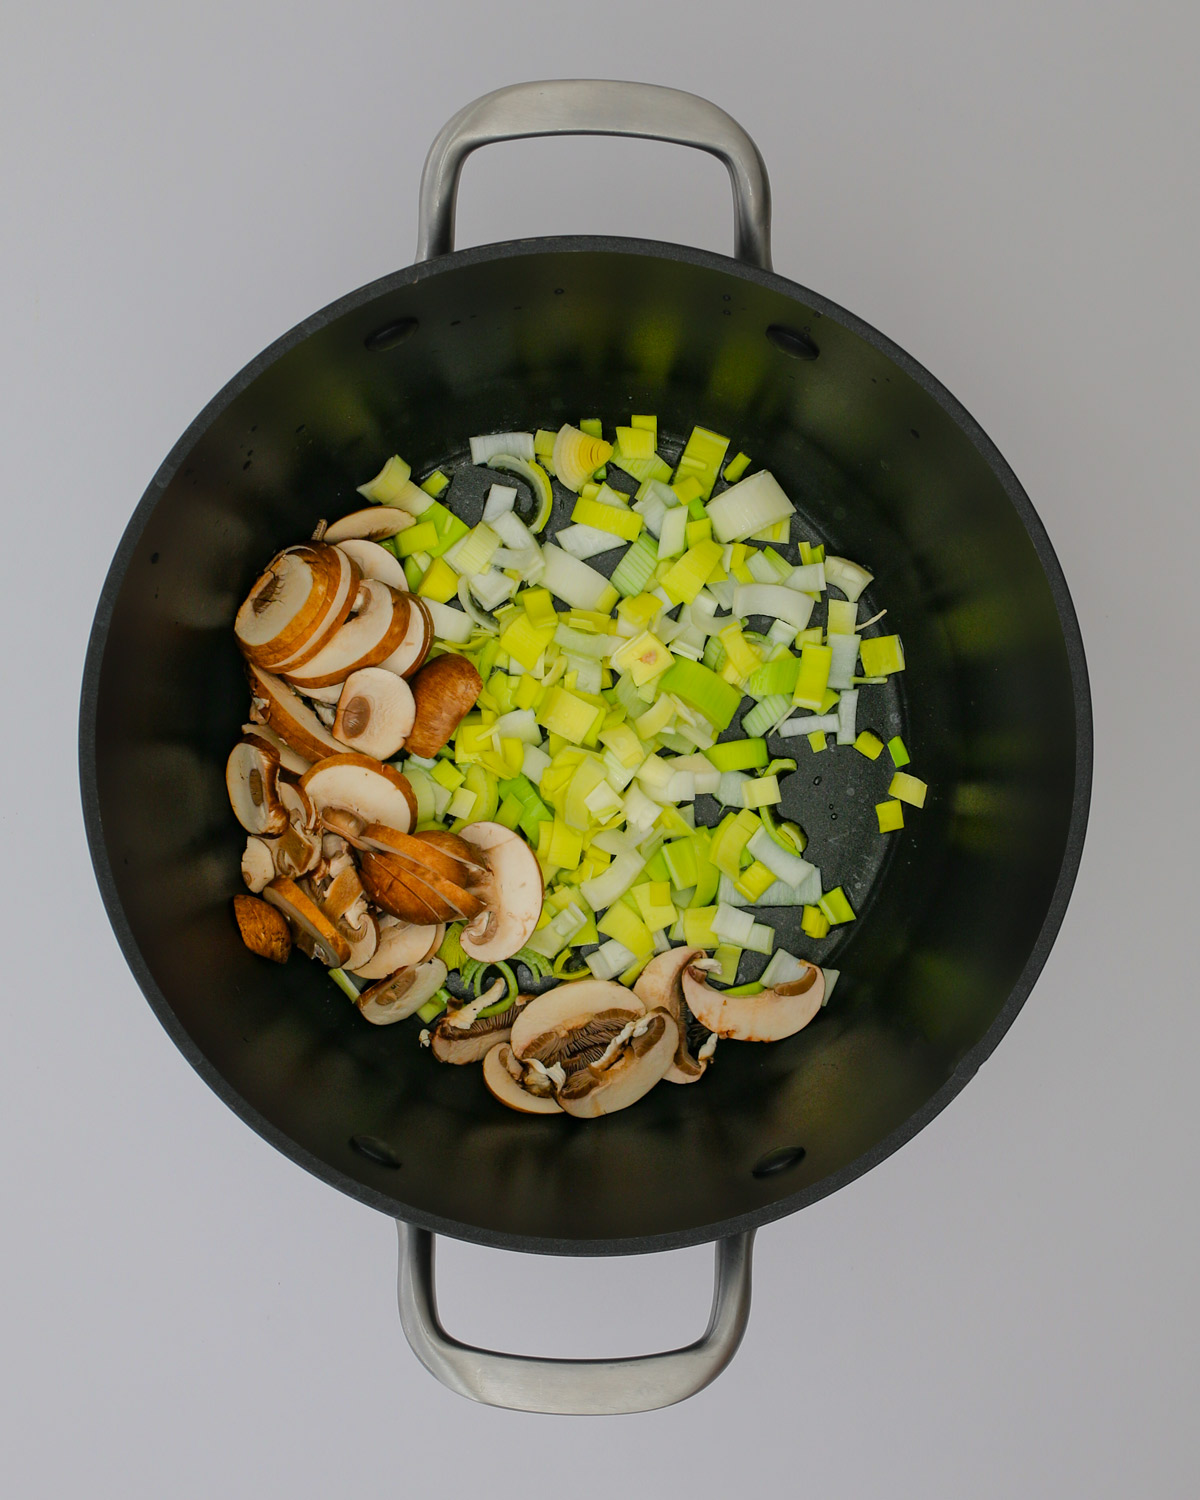 adding mushrooms and leeks to hot oil in the pot.